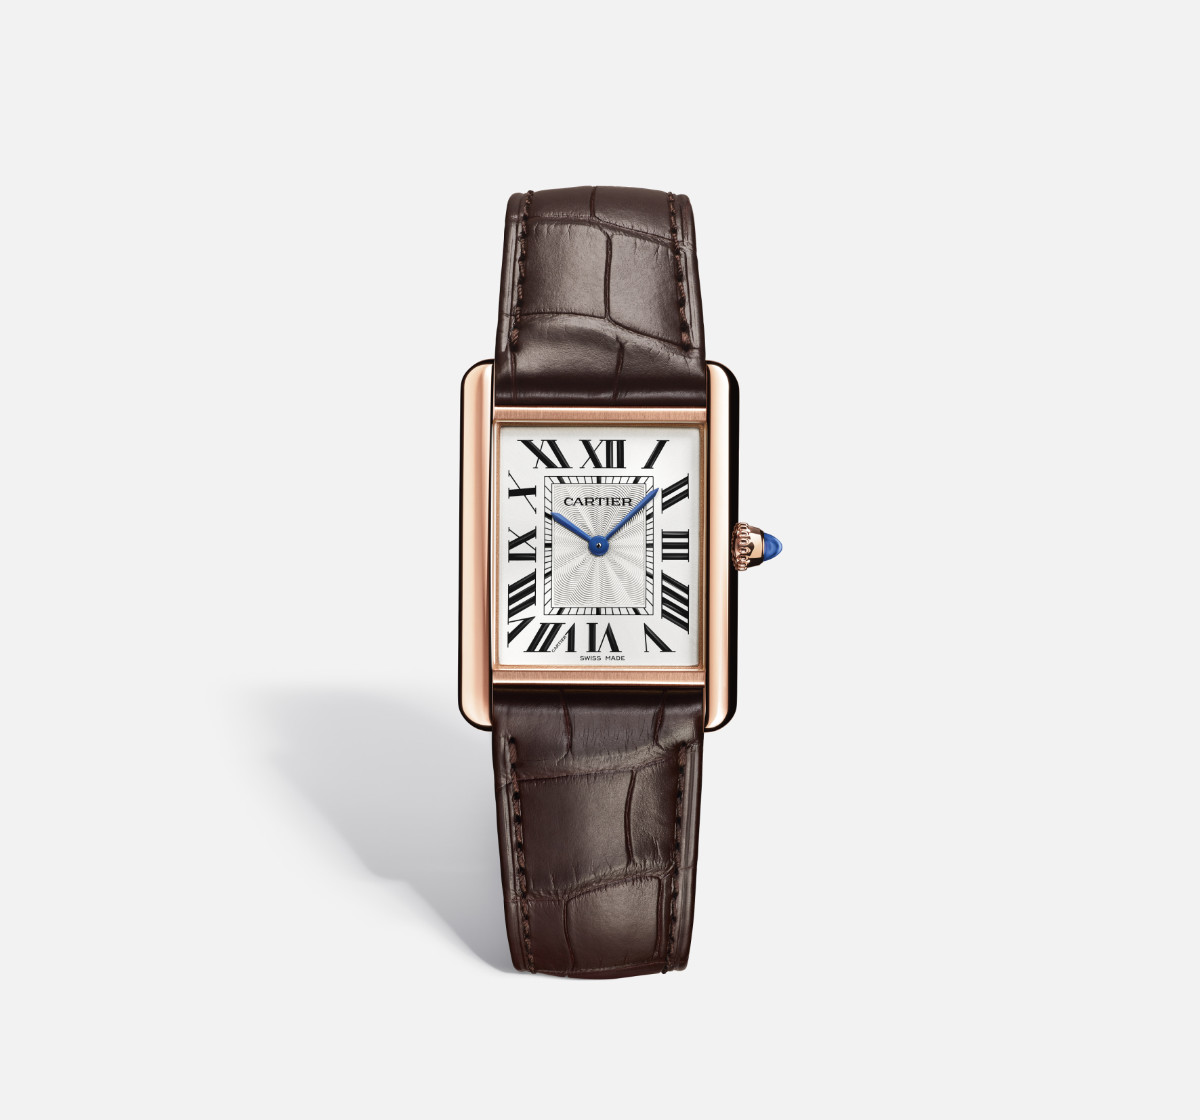 Cartier's Culture of Design - a New Year's campaign devoted to the iconic designs